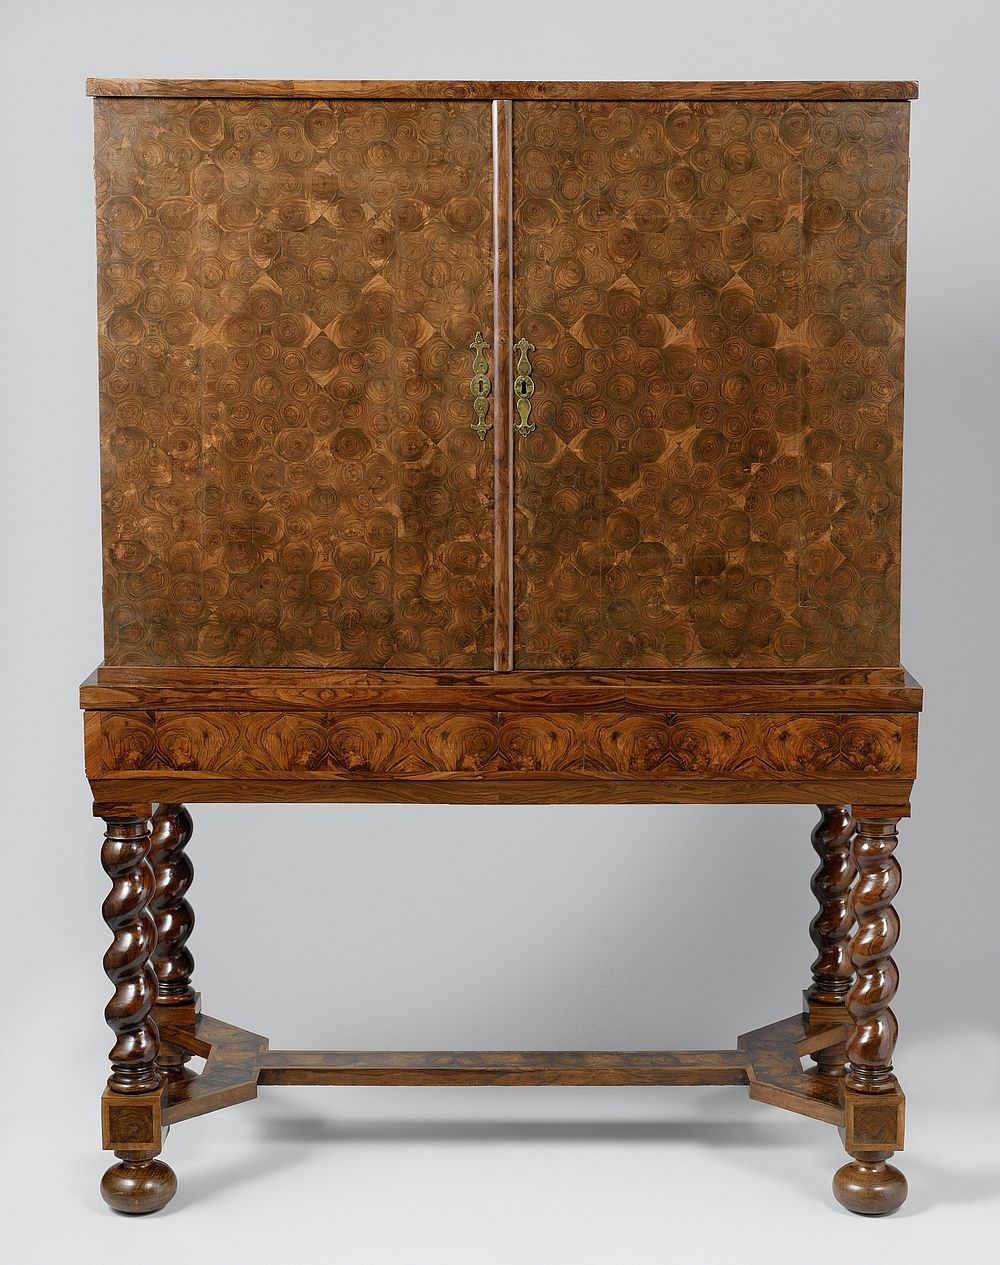 Collector’s cabinet (c. 1675 - c. 1685) by anonymous